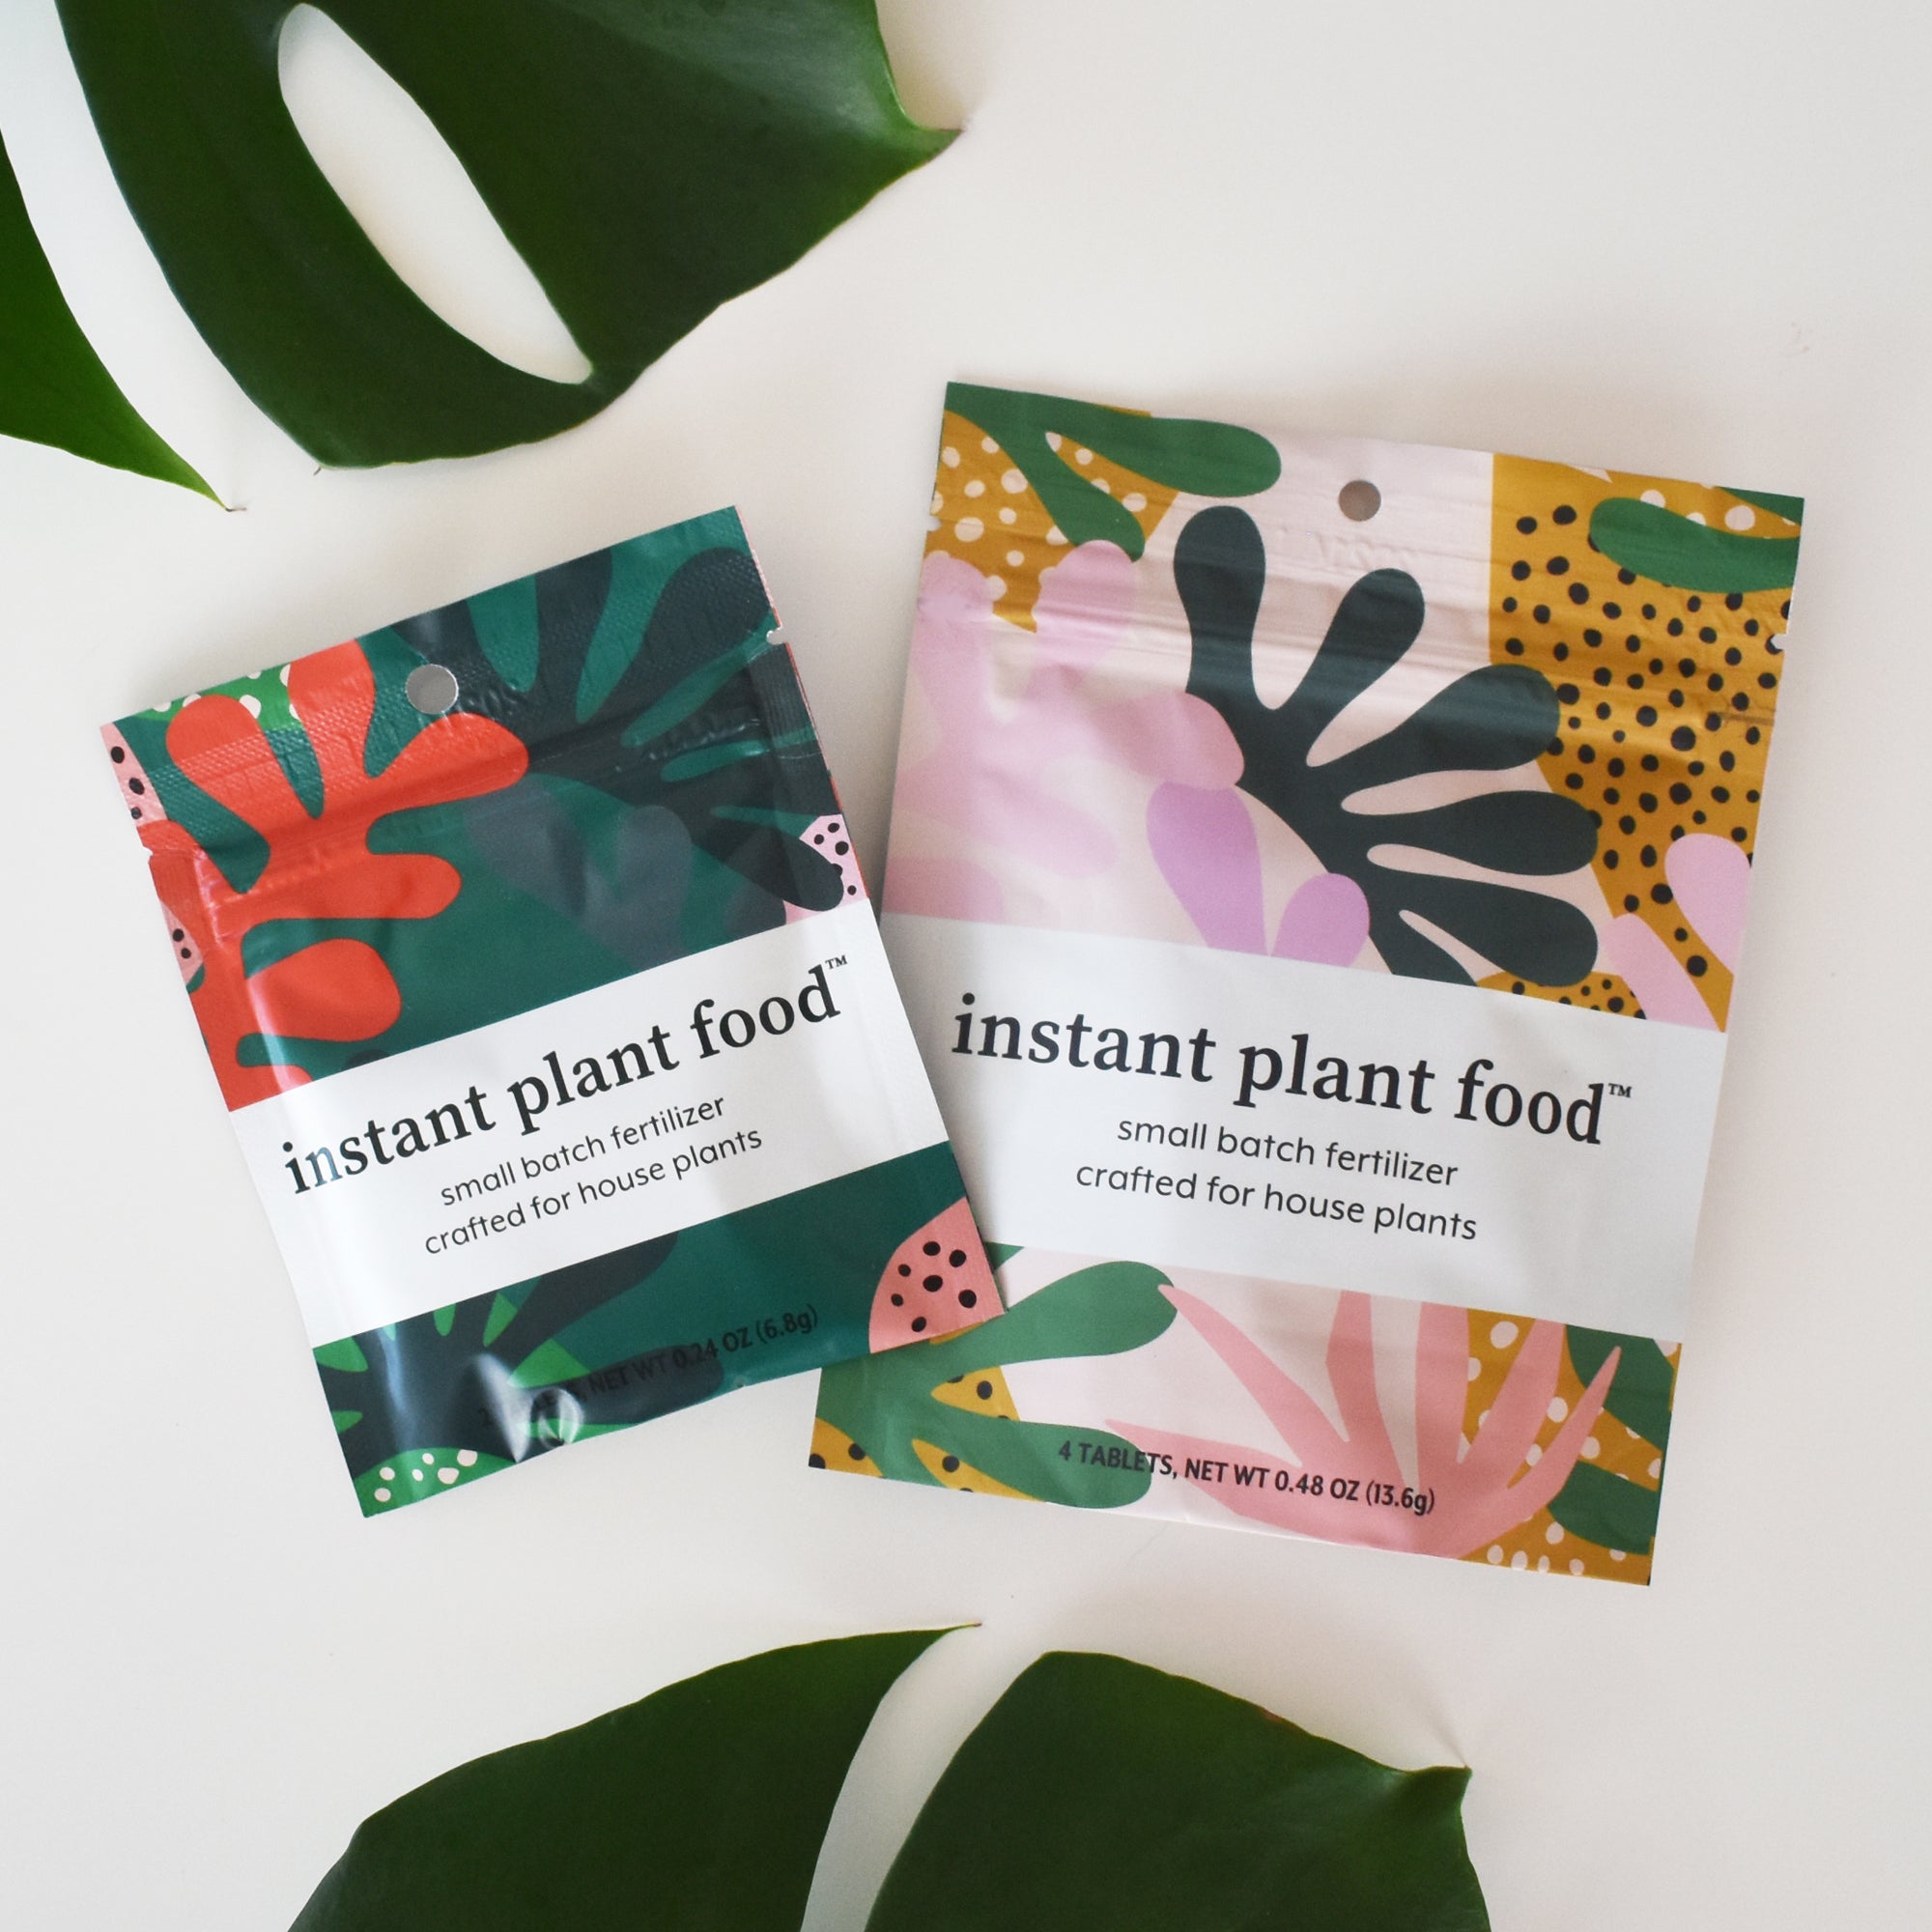 Instant Plant Food self dissolving, houseplant fertilizer tablets are available in (2) tablet or (4) tablet packages. Instant Plant Food™ fertilizer tablets are CERTIFIED carbon neutral, vegan & cruelty free, and 1% of all sales go to organizations helping our planet. Made in USA too!